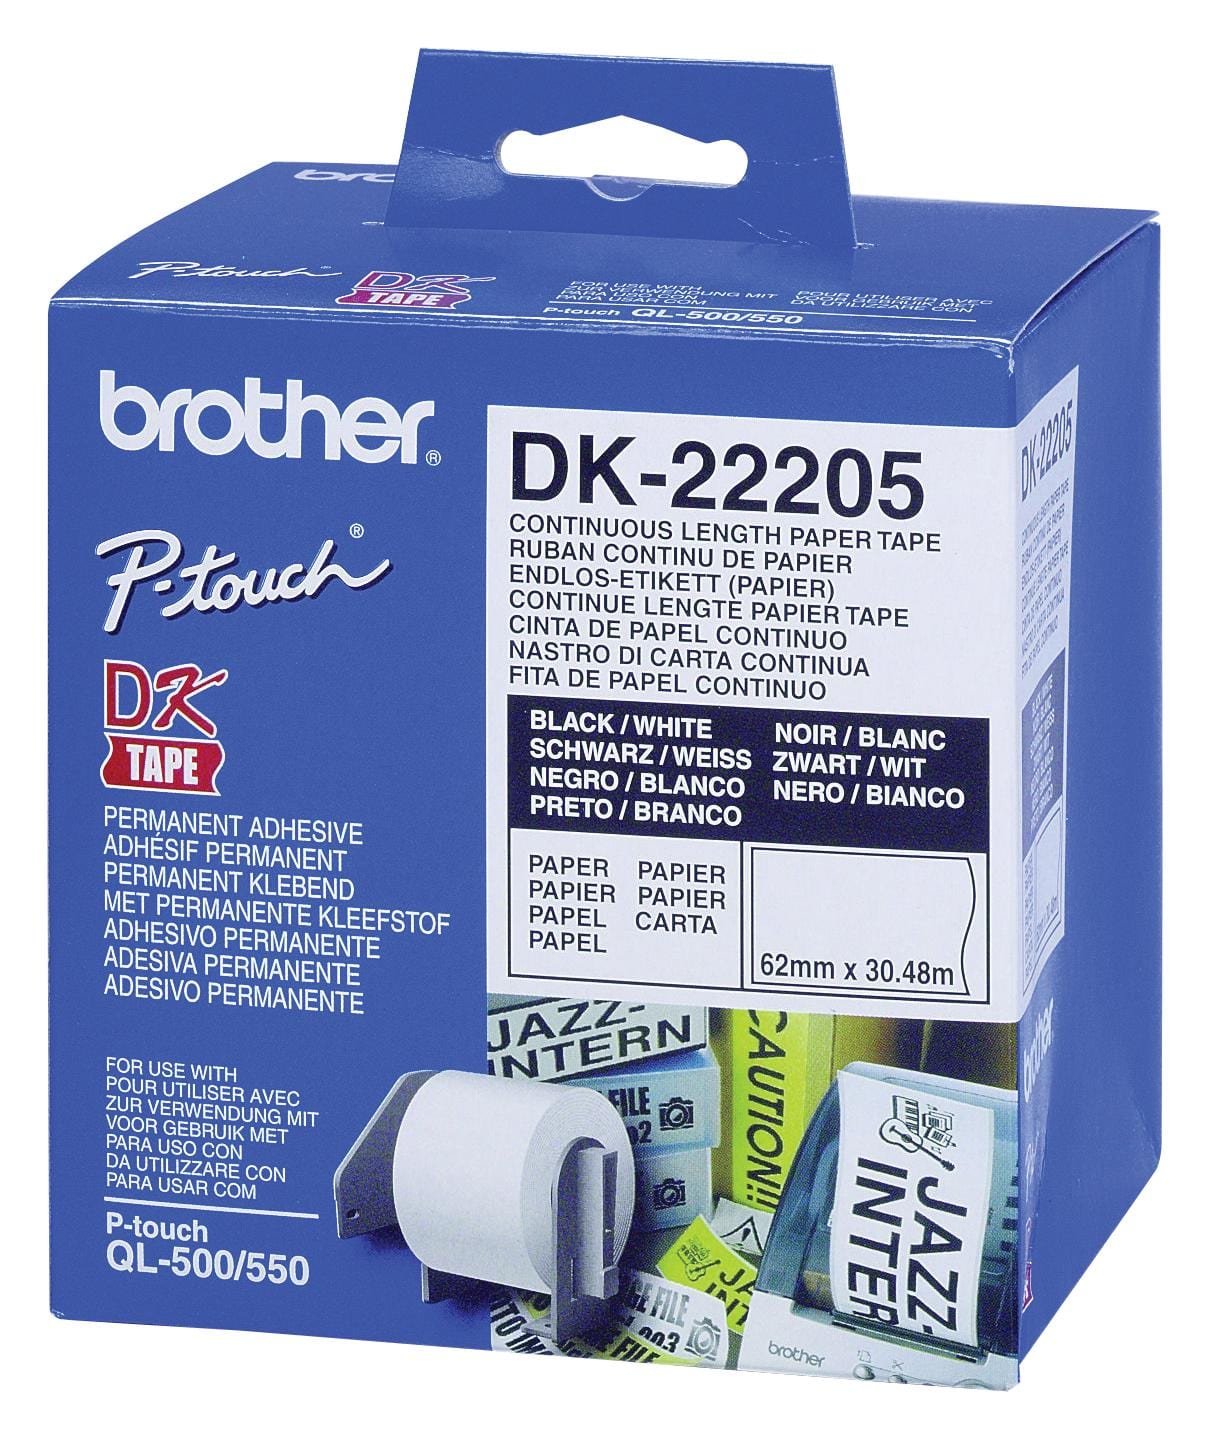 BROTHER Label Printer Tape DK22205 TAPE, CONTINUOUS PAPER, 62MM BROTHER 8779210 DK22205